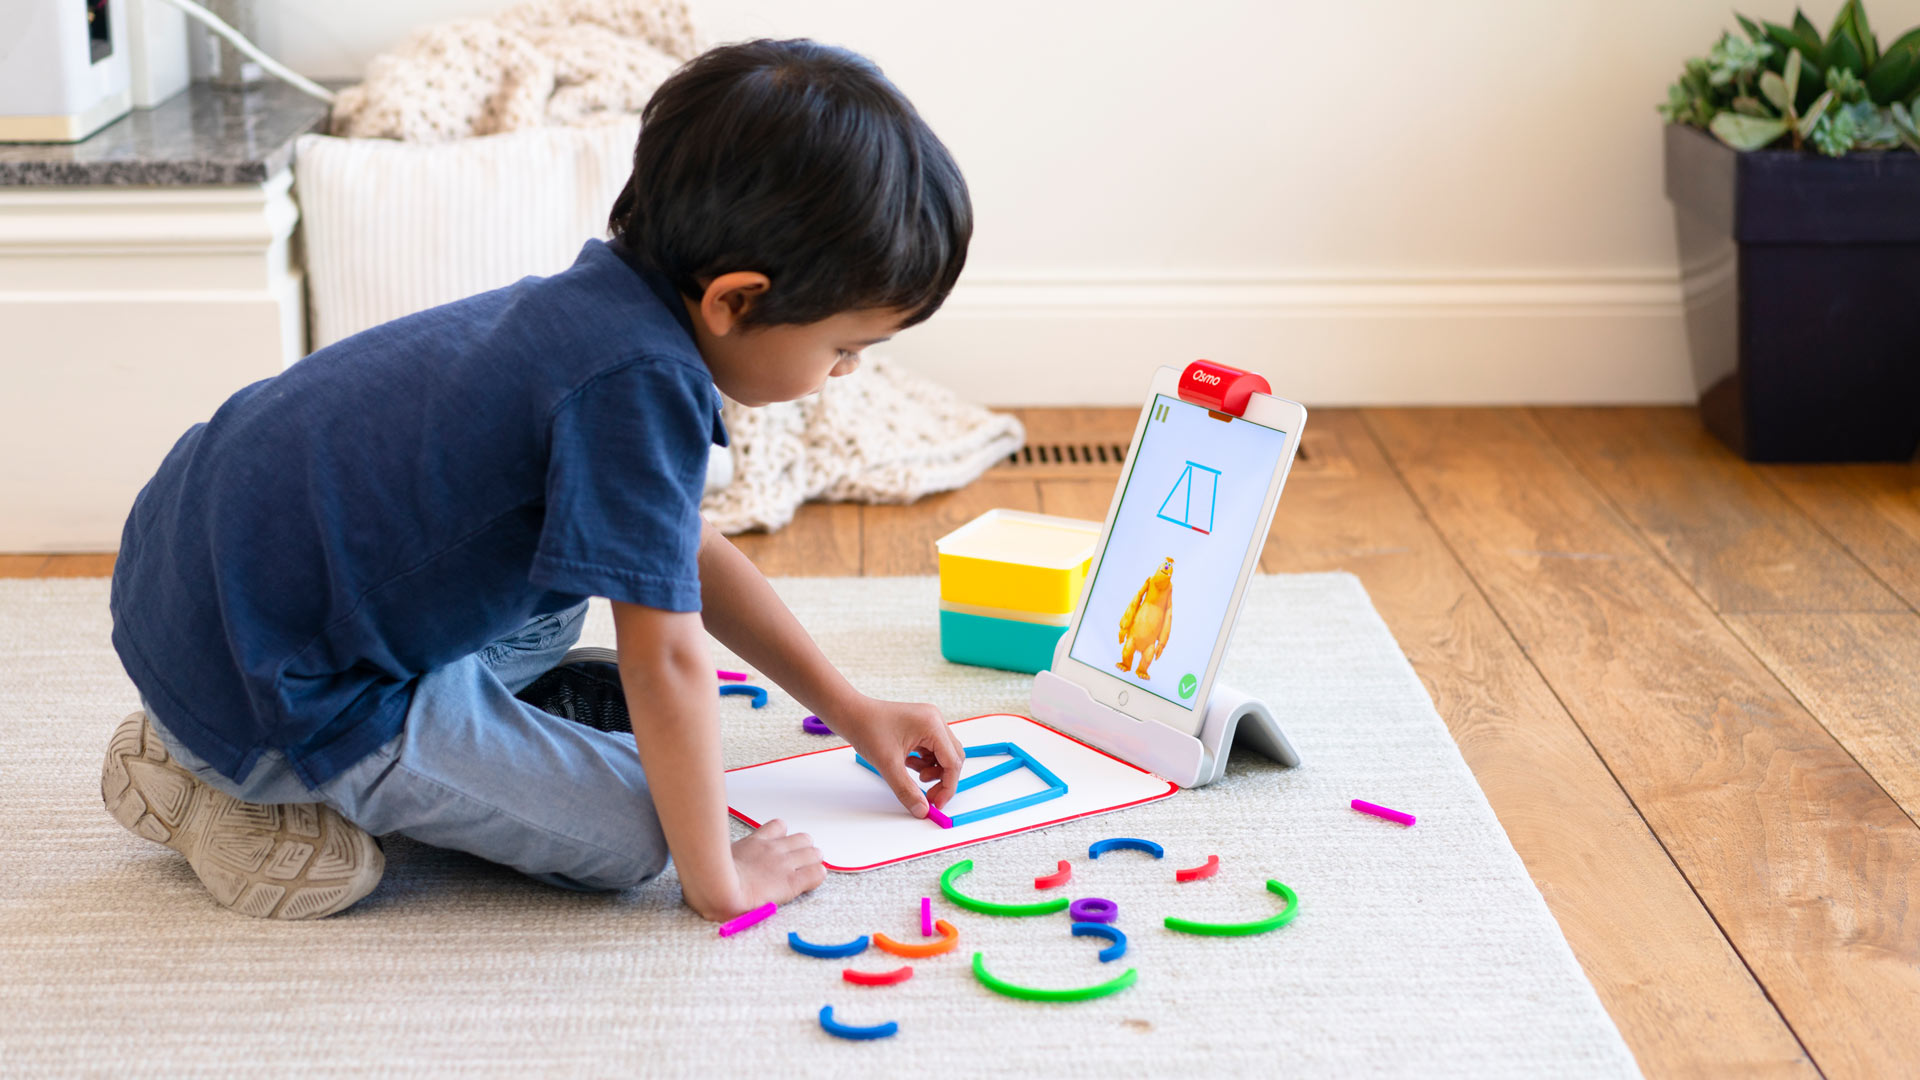 Featured image for “Platz 2 – Osmo Little Genius Starter Kit (Tangible Play Inc. / Osmo)”